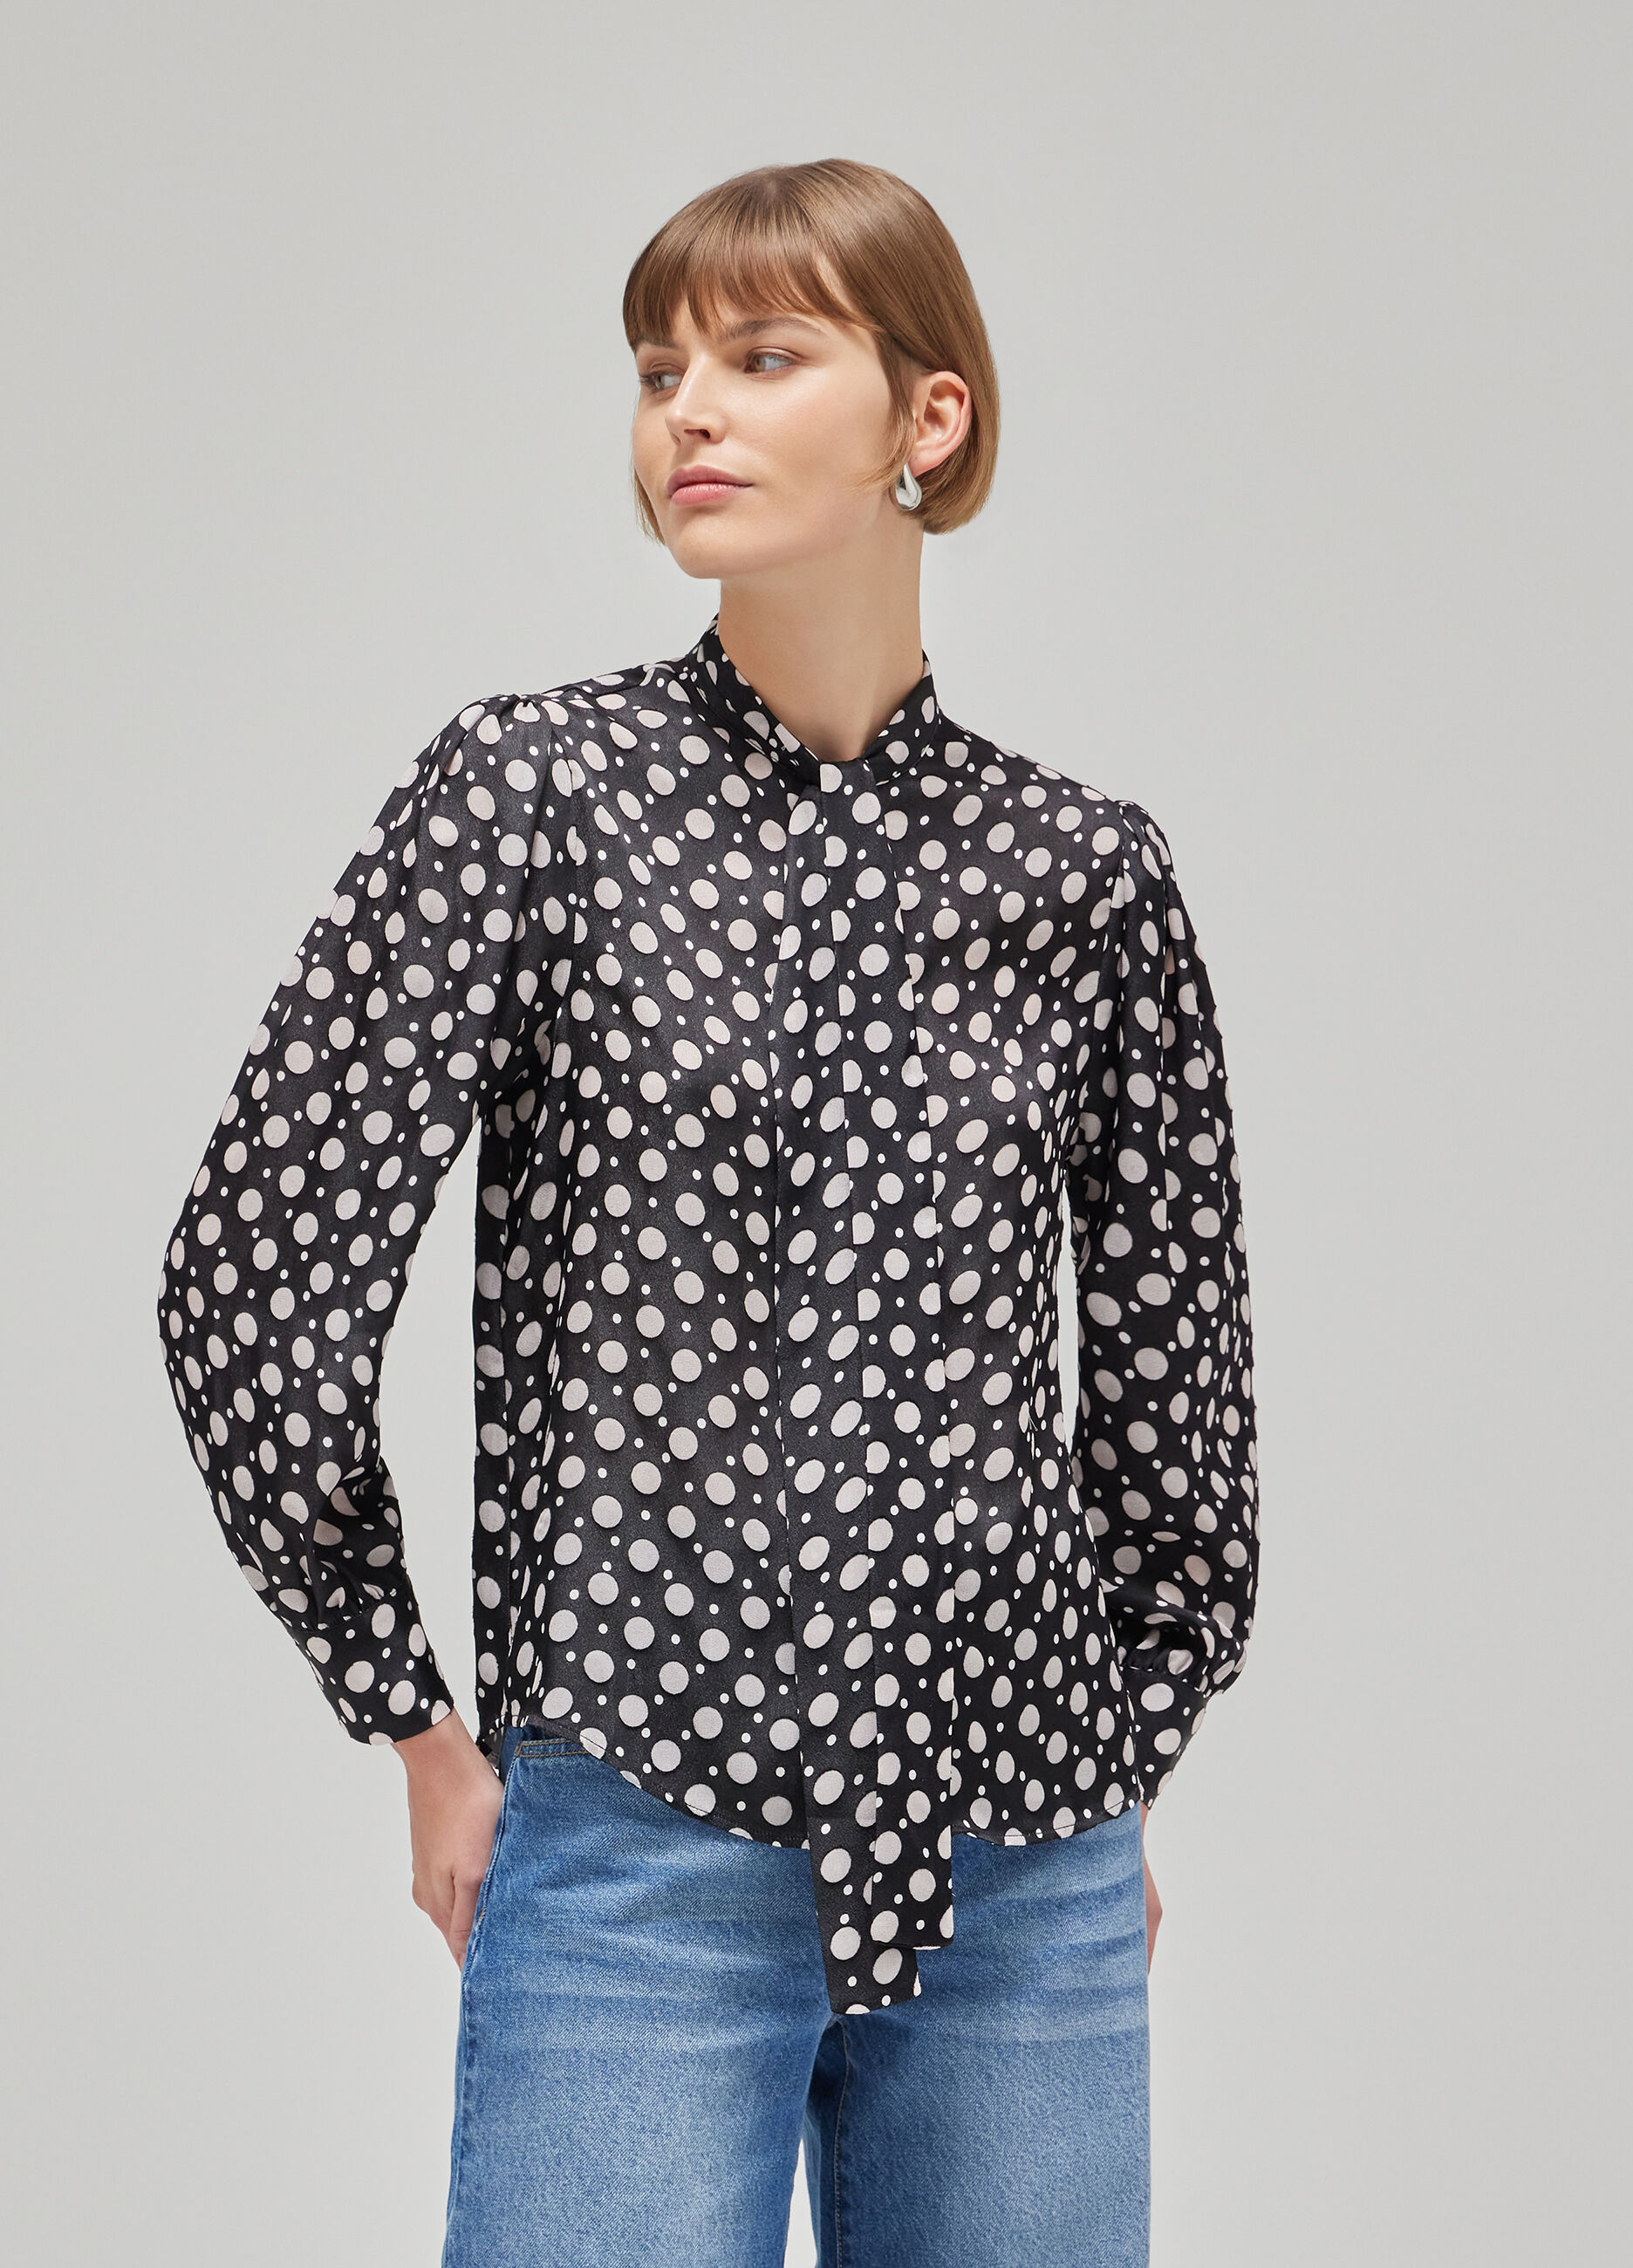 Viscose blend shirt with neck bow